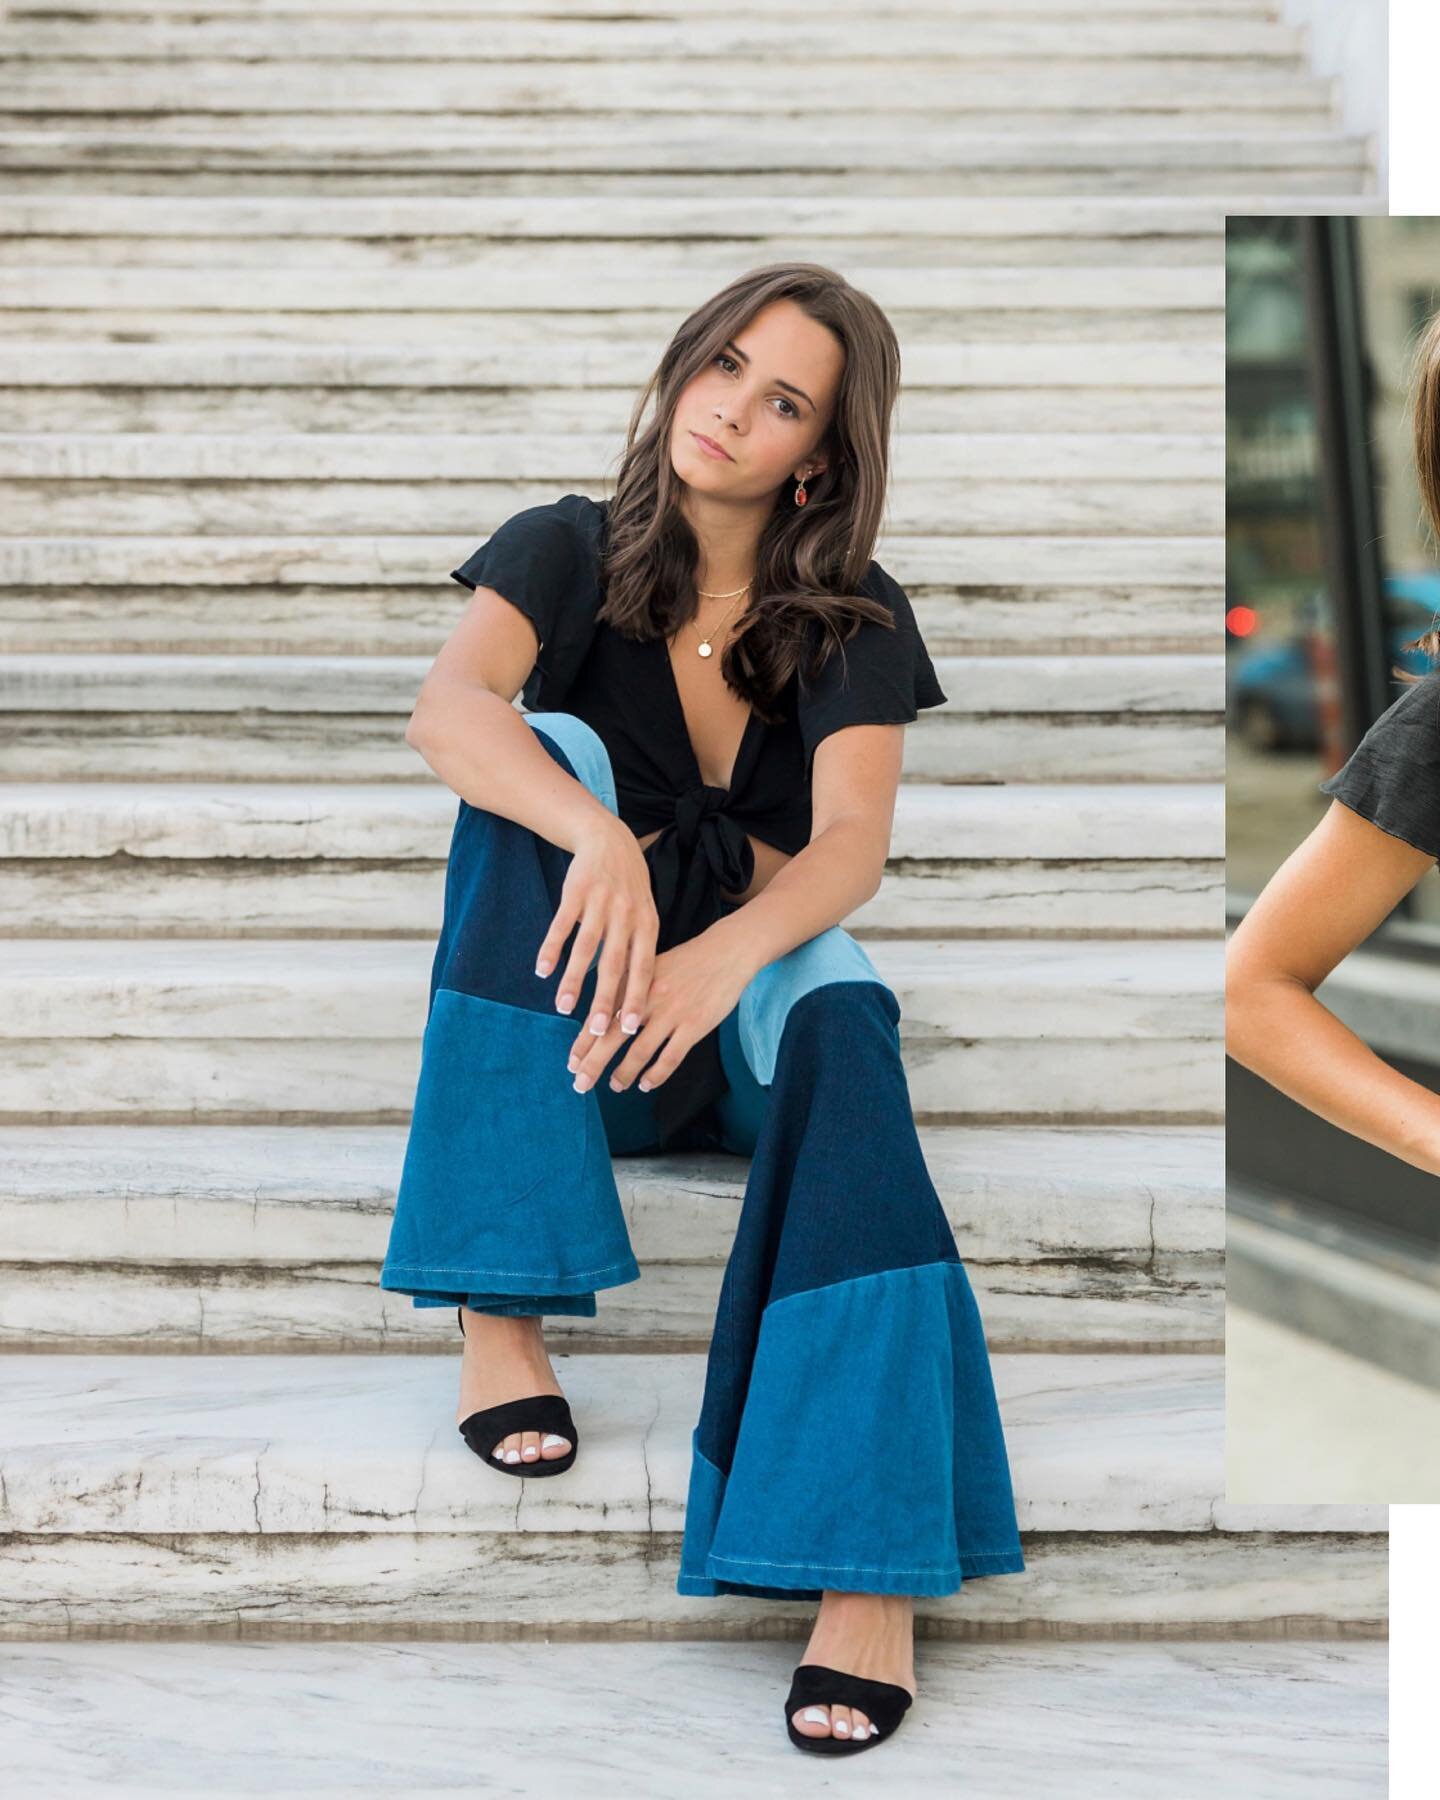 When your senior brings a statement outfit, you find locations to enhance the outfit &amp; bring out some personality!  I think Lauren nailed it!⁠
.⁠
.⁠
.⁠
.⁠
.⁠
.⁠
.⁠
#metrodetroit #annarborphotographer #divinechild #mercyhighschool #detroitsenior #